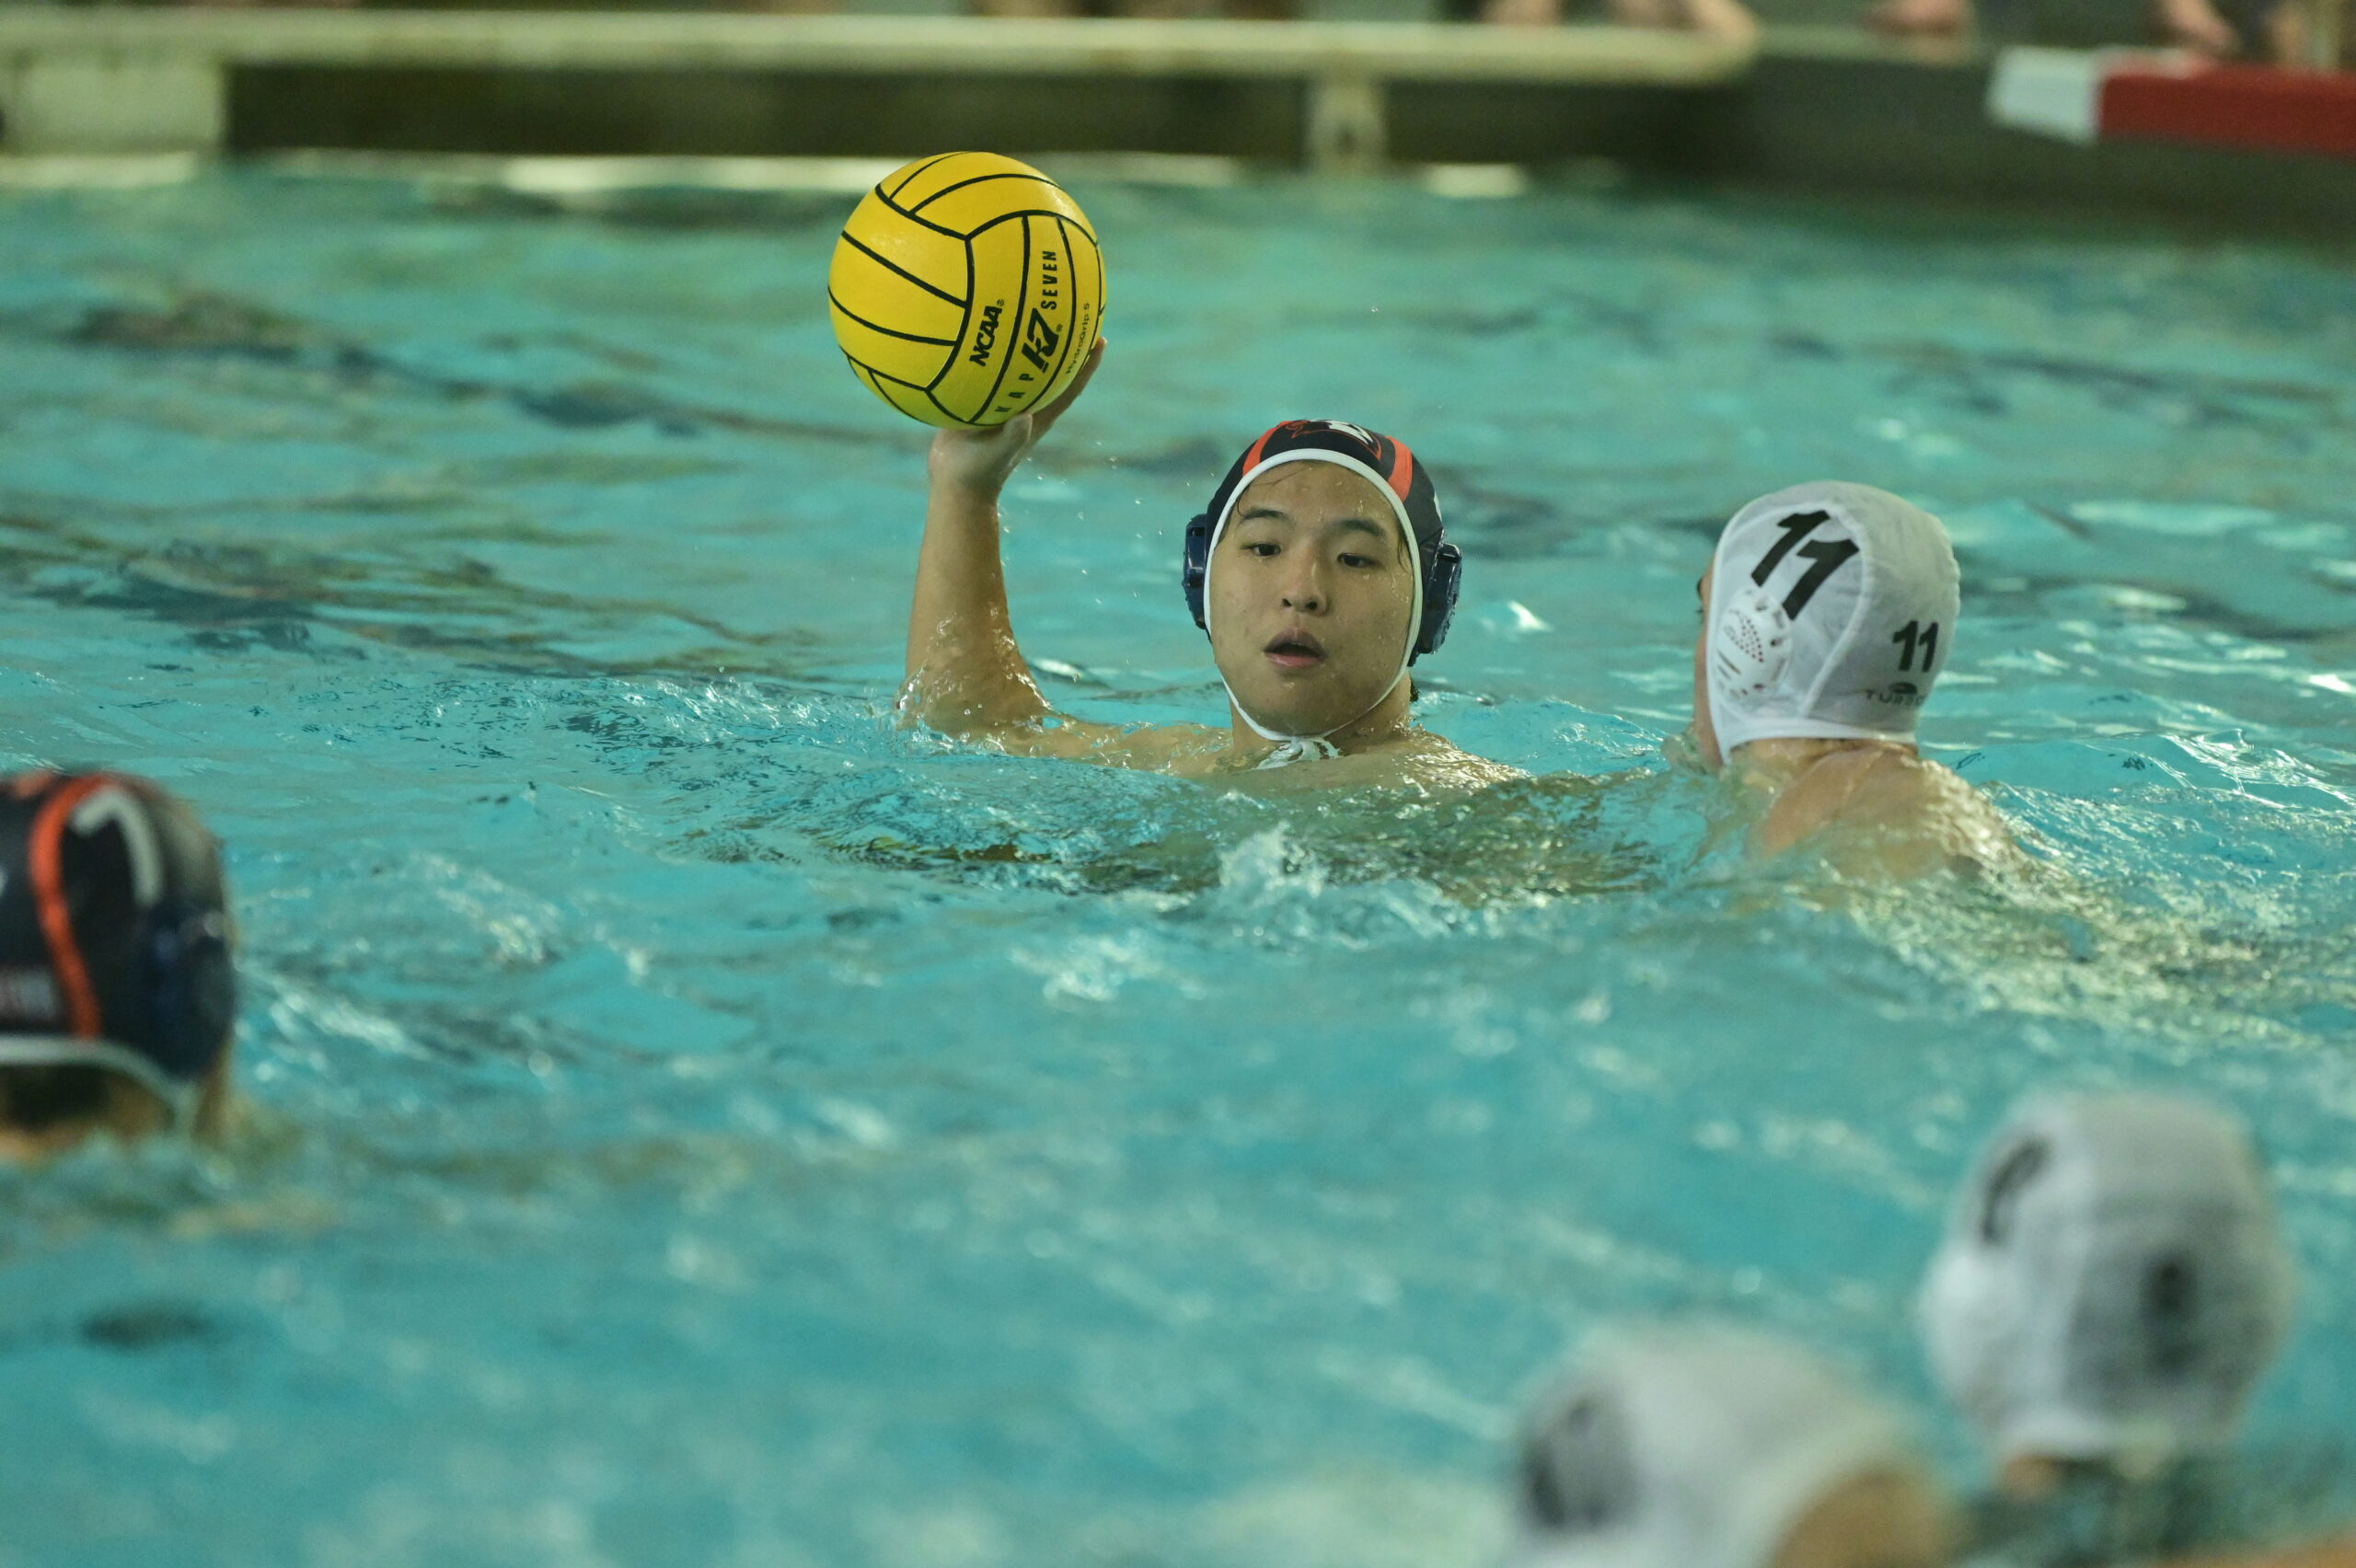 A waterpolo player gets ready to throw the ball during a game